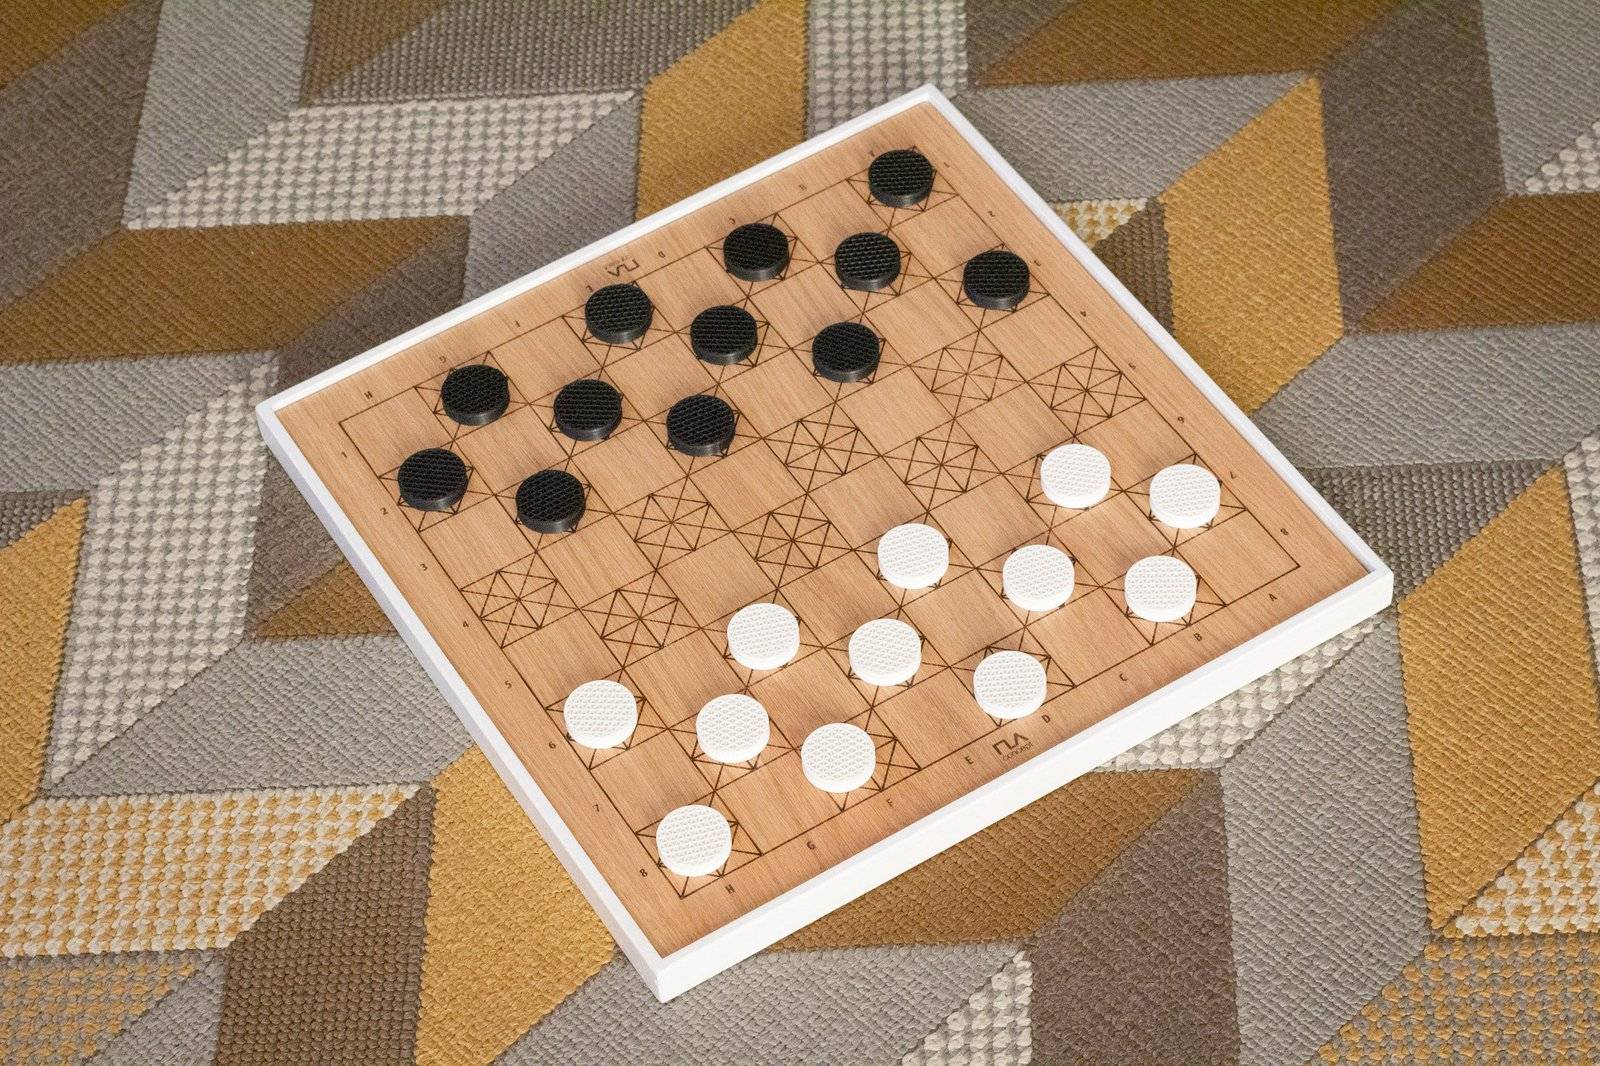 White Oak and Walnut Handmade Modern Geometric Checkers/Draughts with 3D Printed Pieces